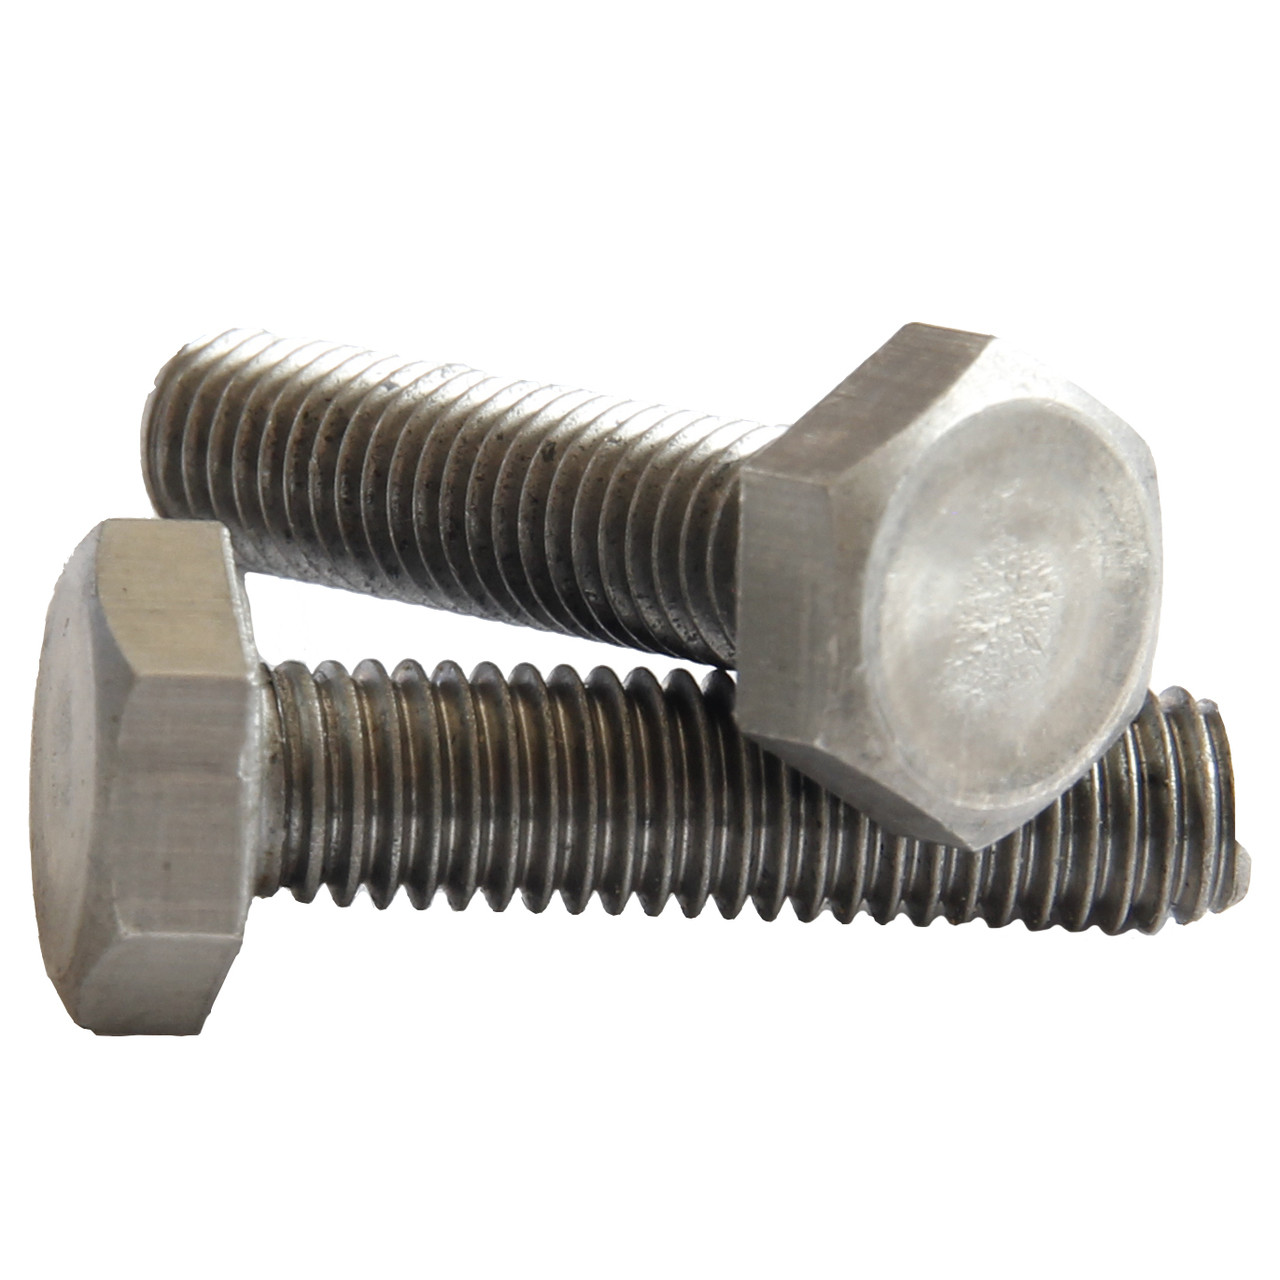 M4 x 20mm Stainless Slotted Pan Hd Screws  10 pack